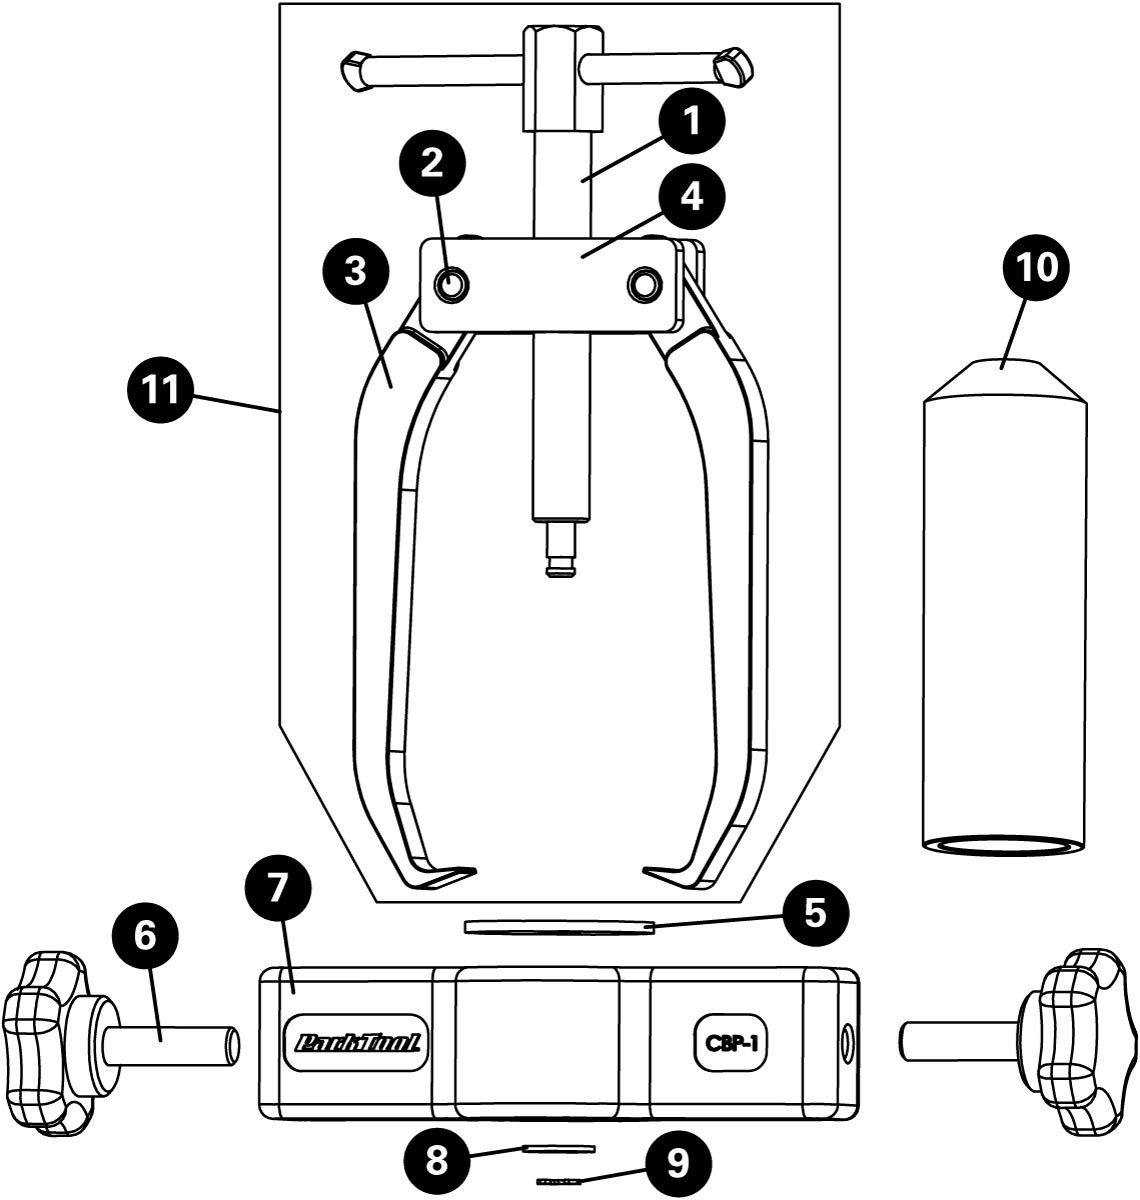 Parts diagram for CBP-3 Campagnolo® Bearing Puller and Installer Set, enlarged